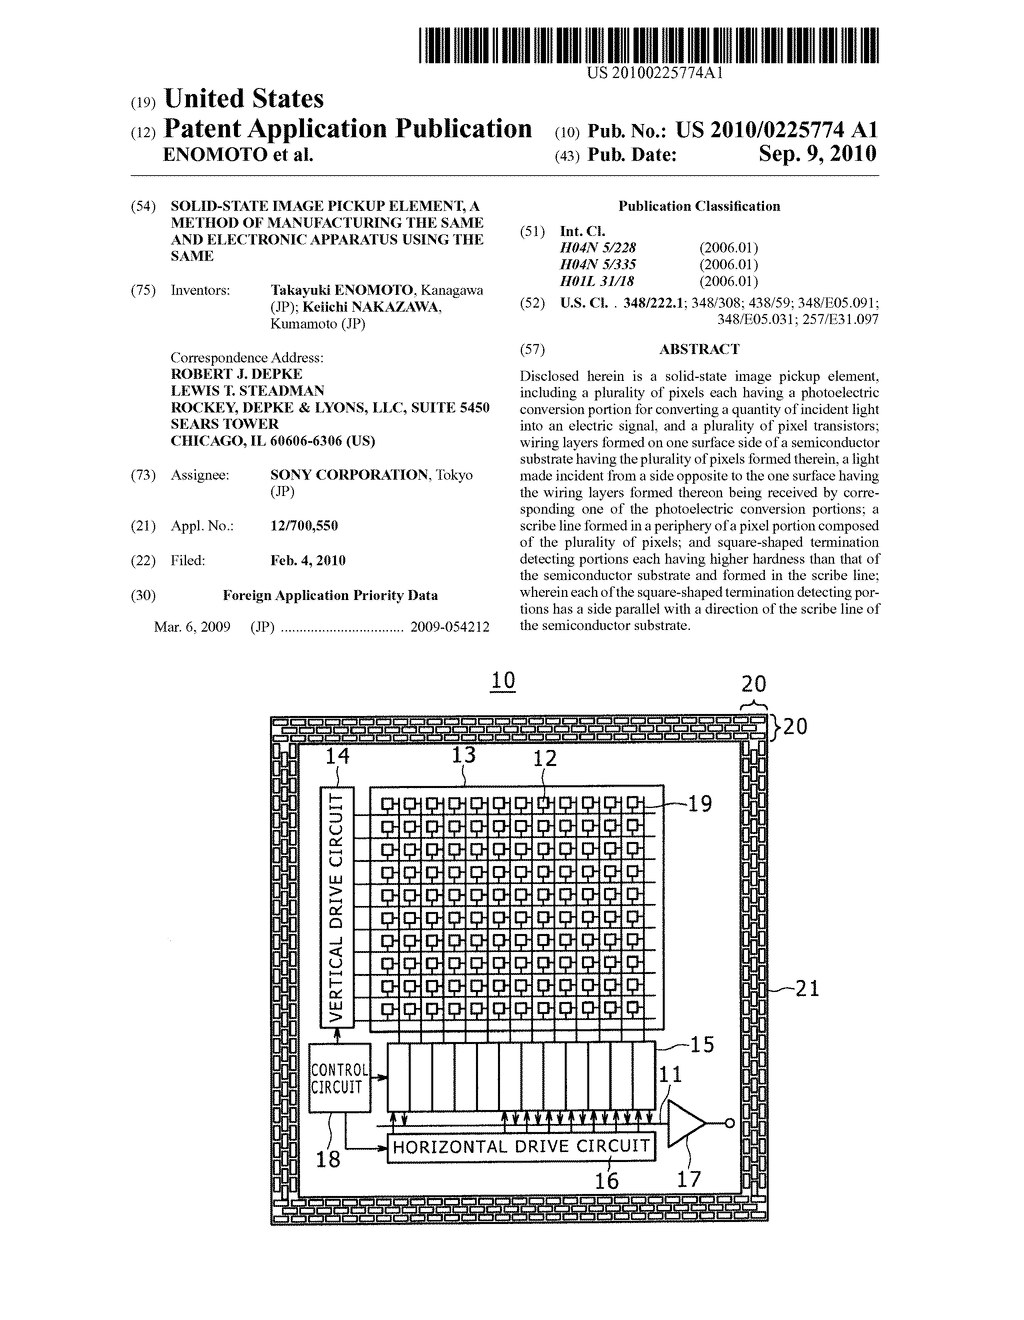 SOLID-STATE IMAGE PICKUP ELEMENT, A METHOD OF MANUFACTURING THE SAME AND ELECTRONIC APPARATUS USING THE SAME - diagram, schematic, and image 01